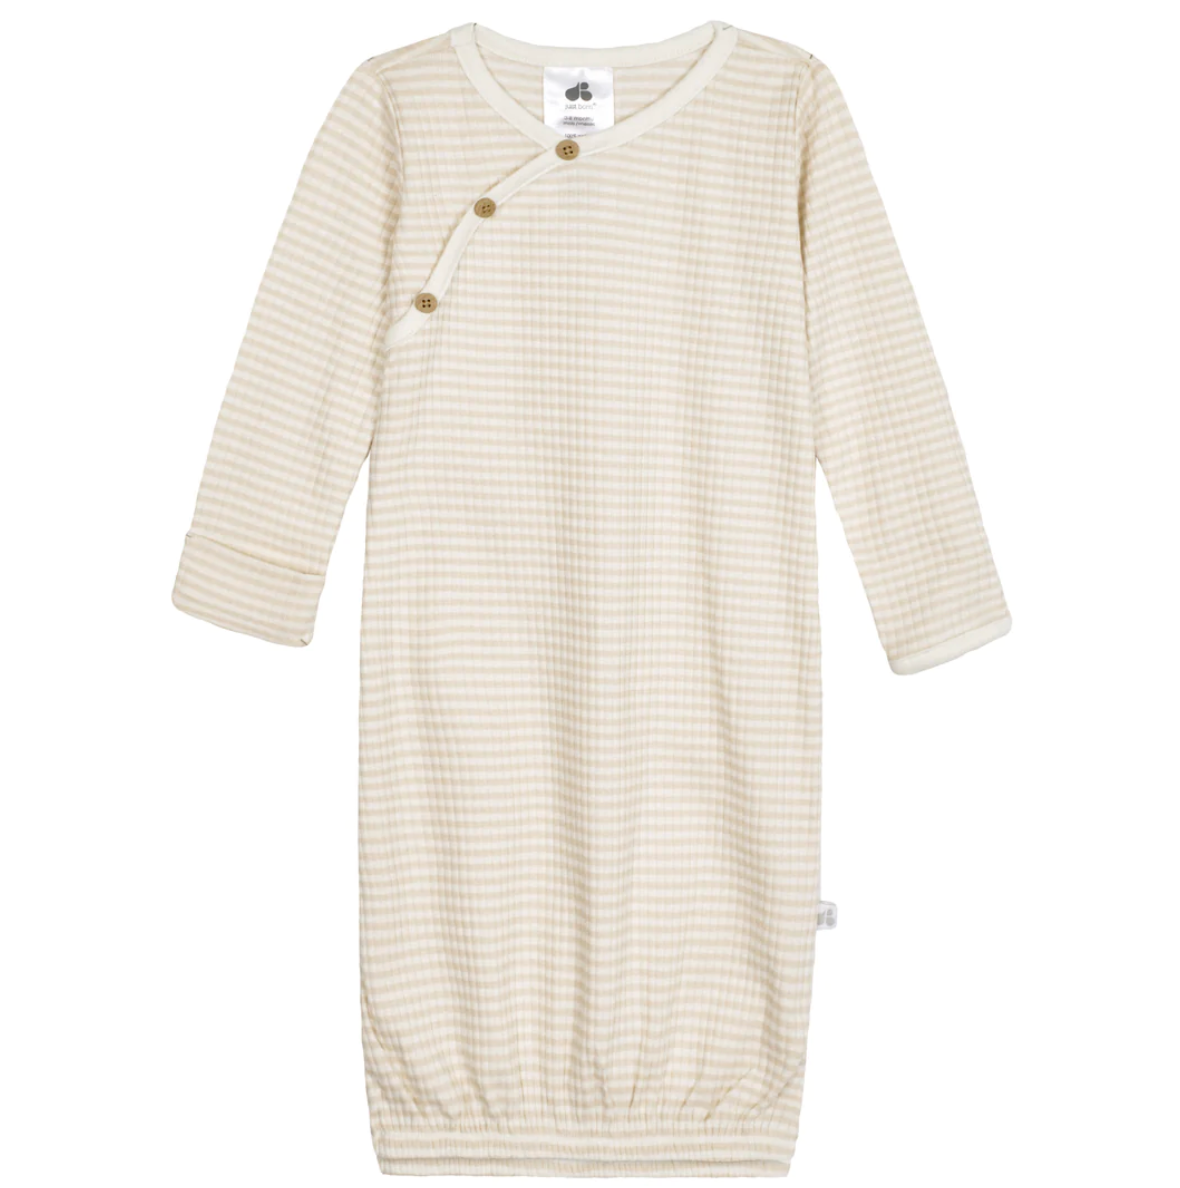 Just Born - Tan and Ivory Striped Sleeping Gown